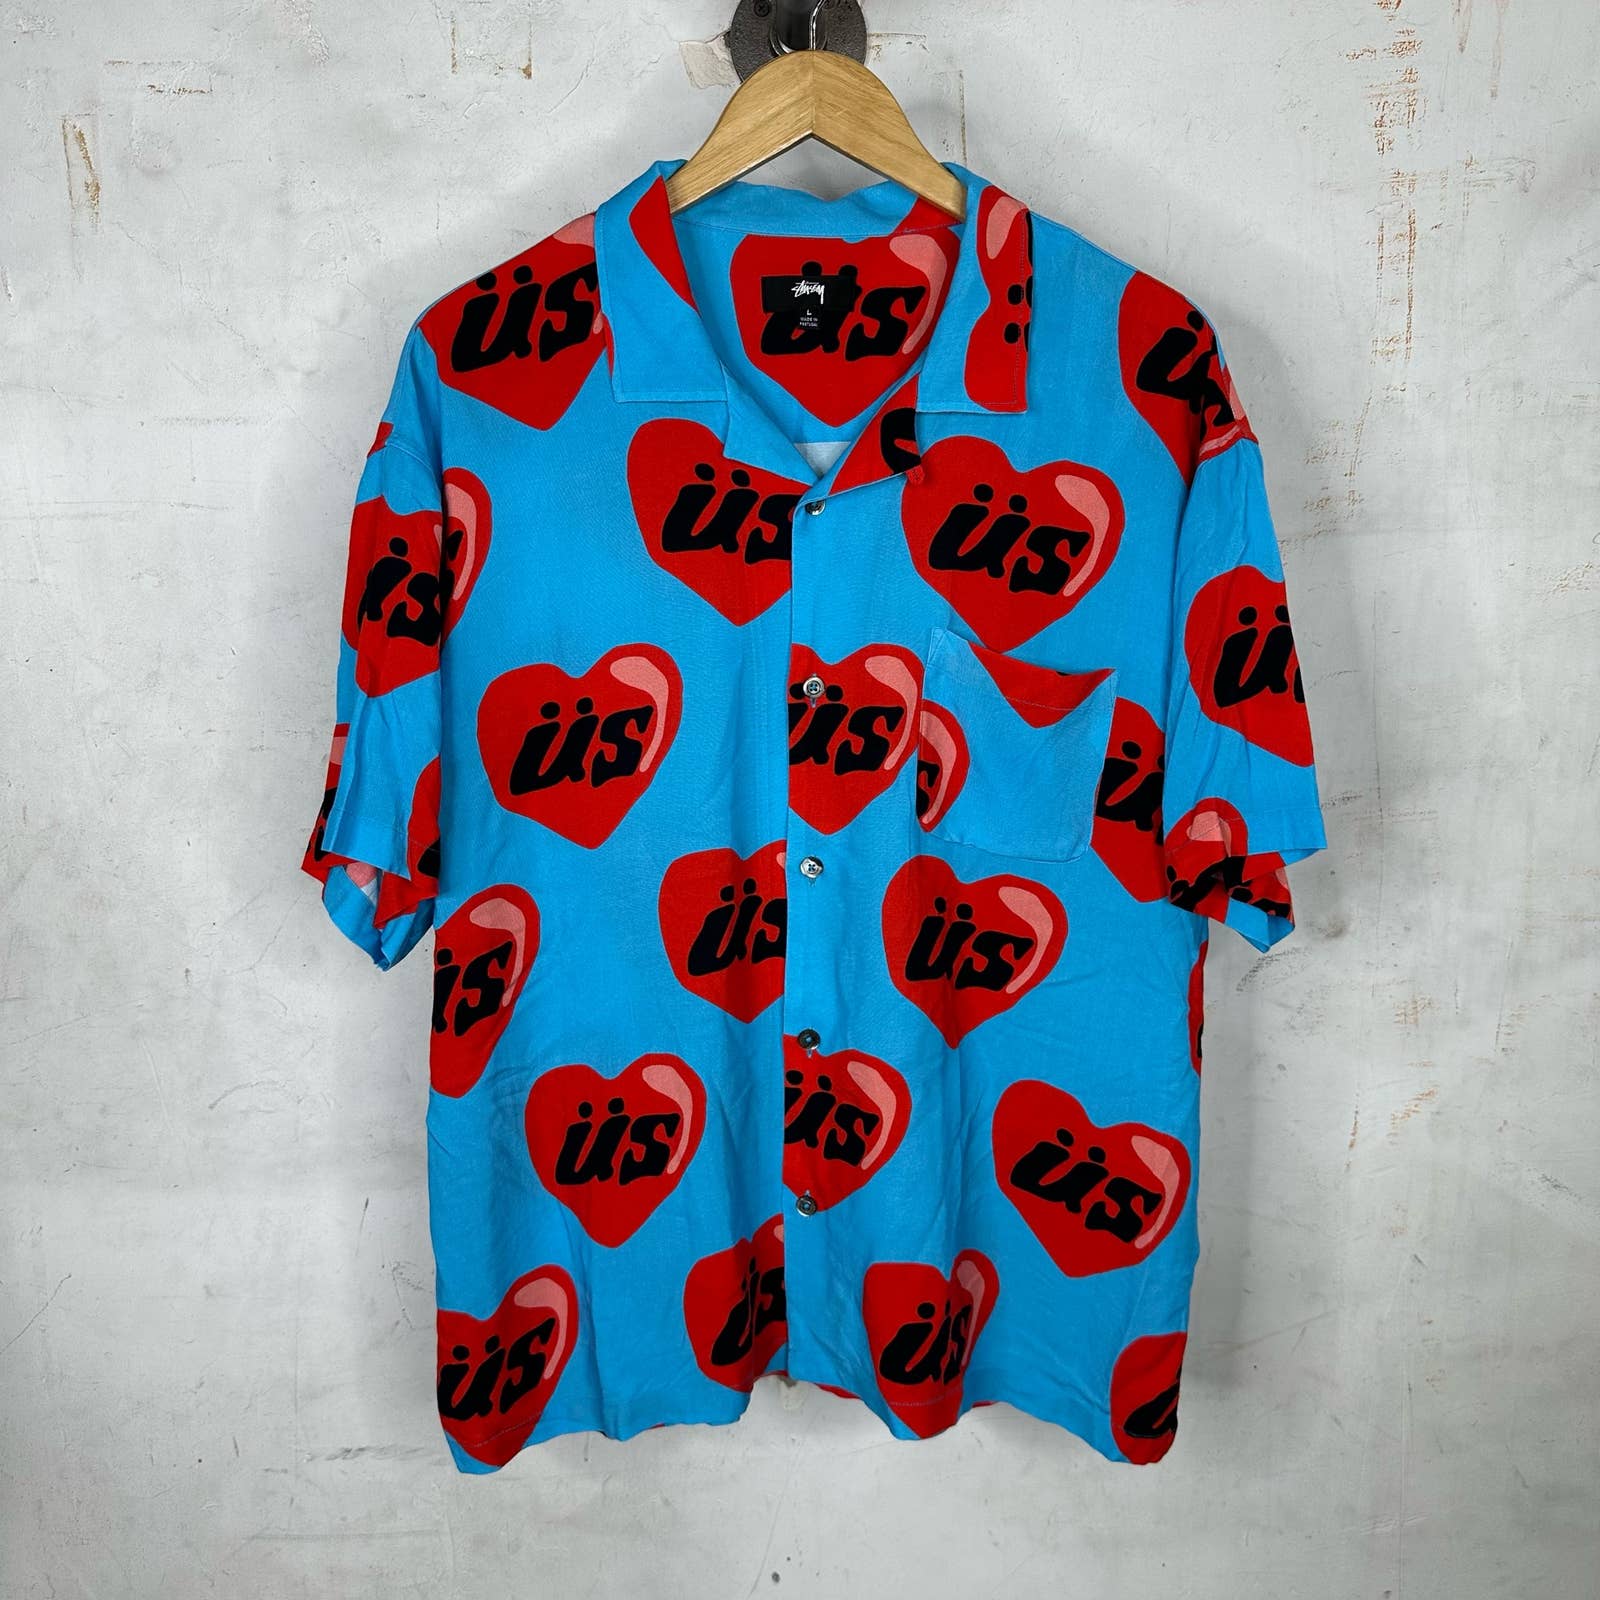 Stussy CPFM Heart Button Up Shirt – www.Lukes.store